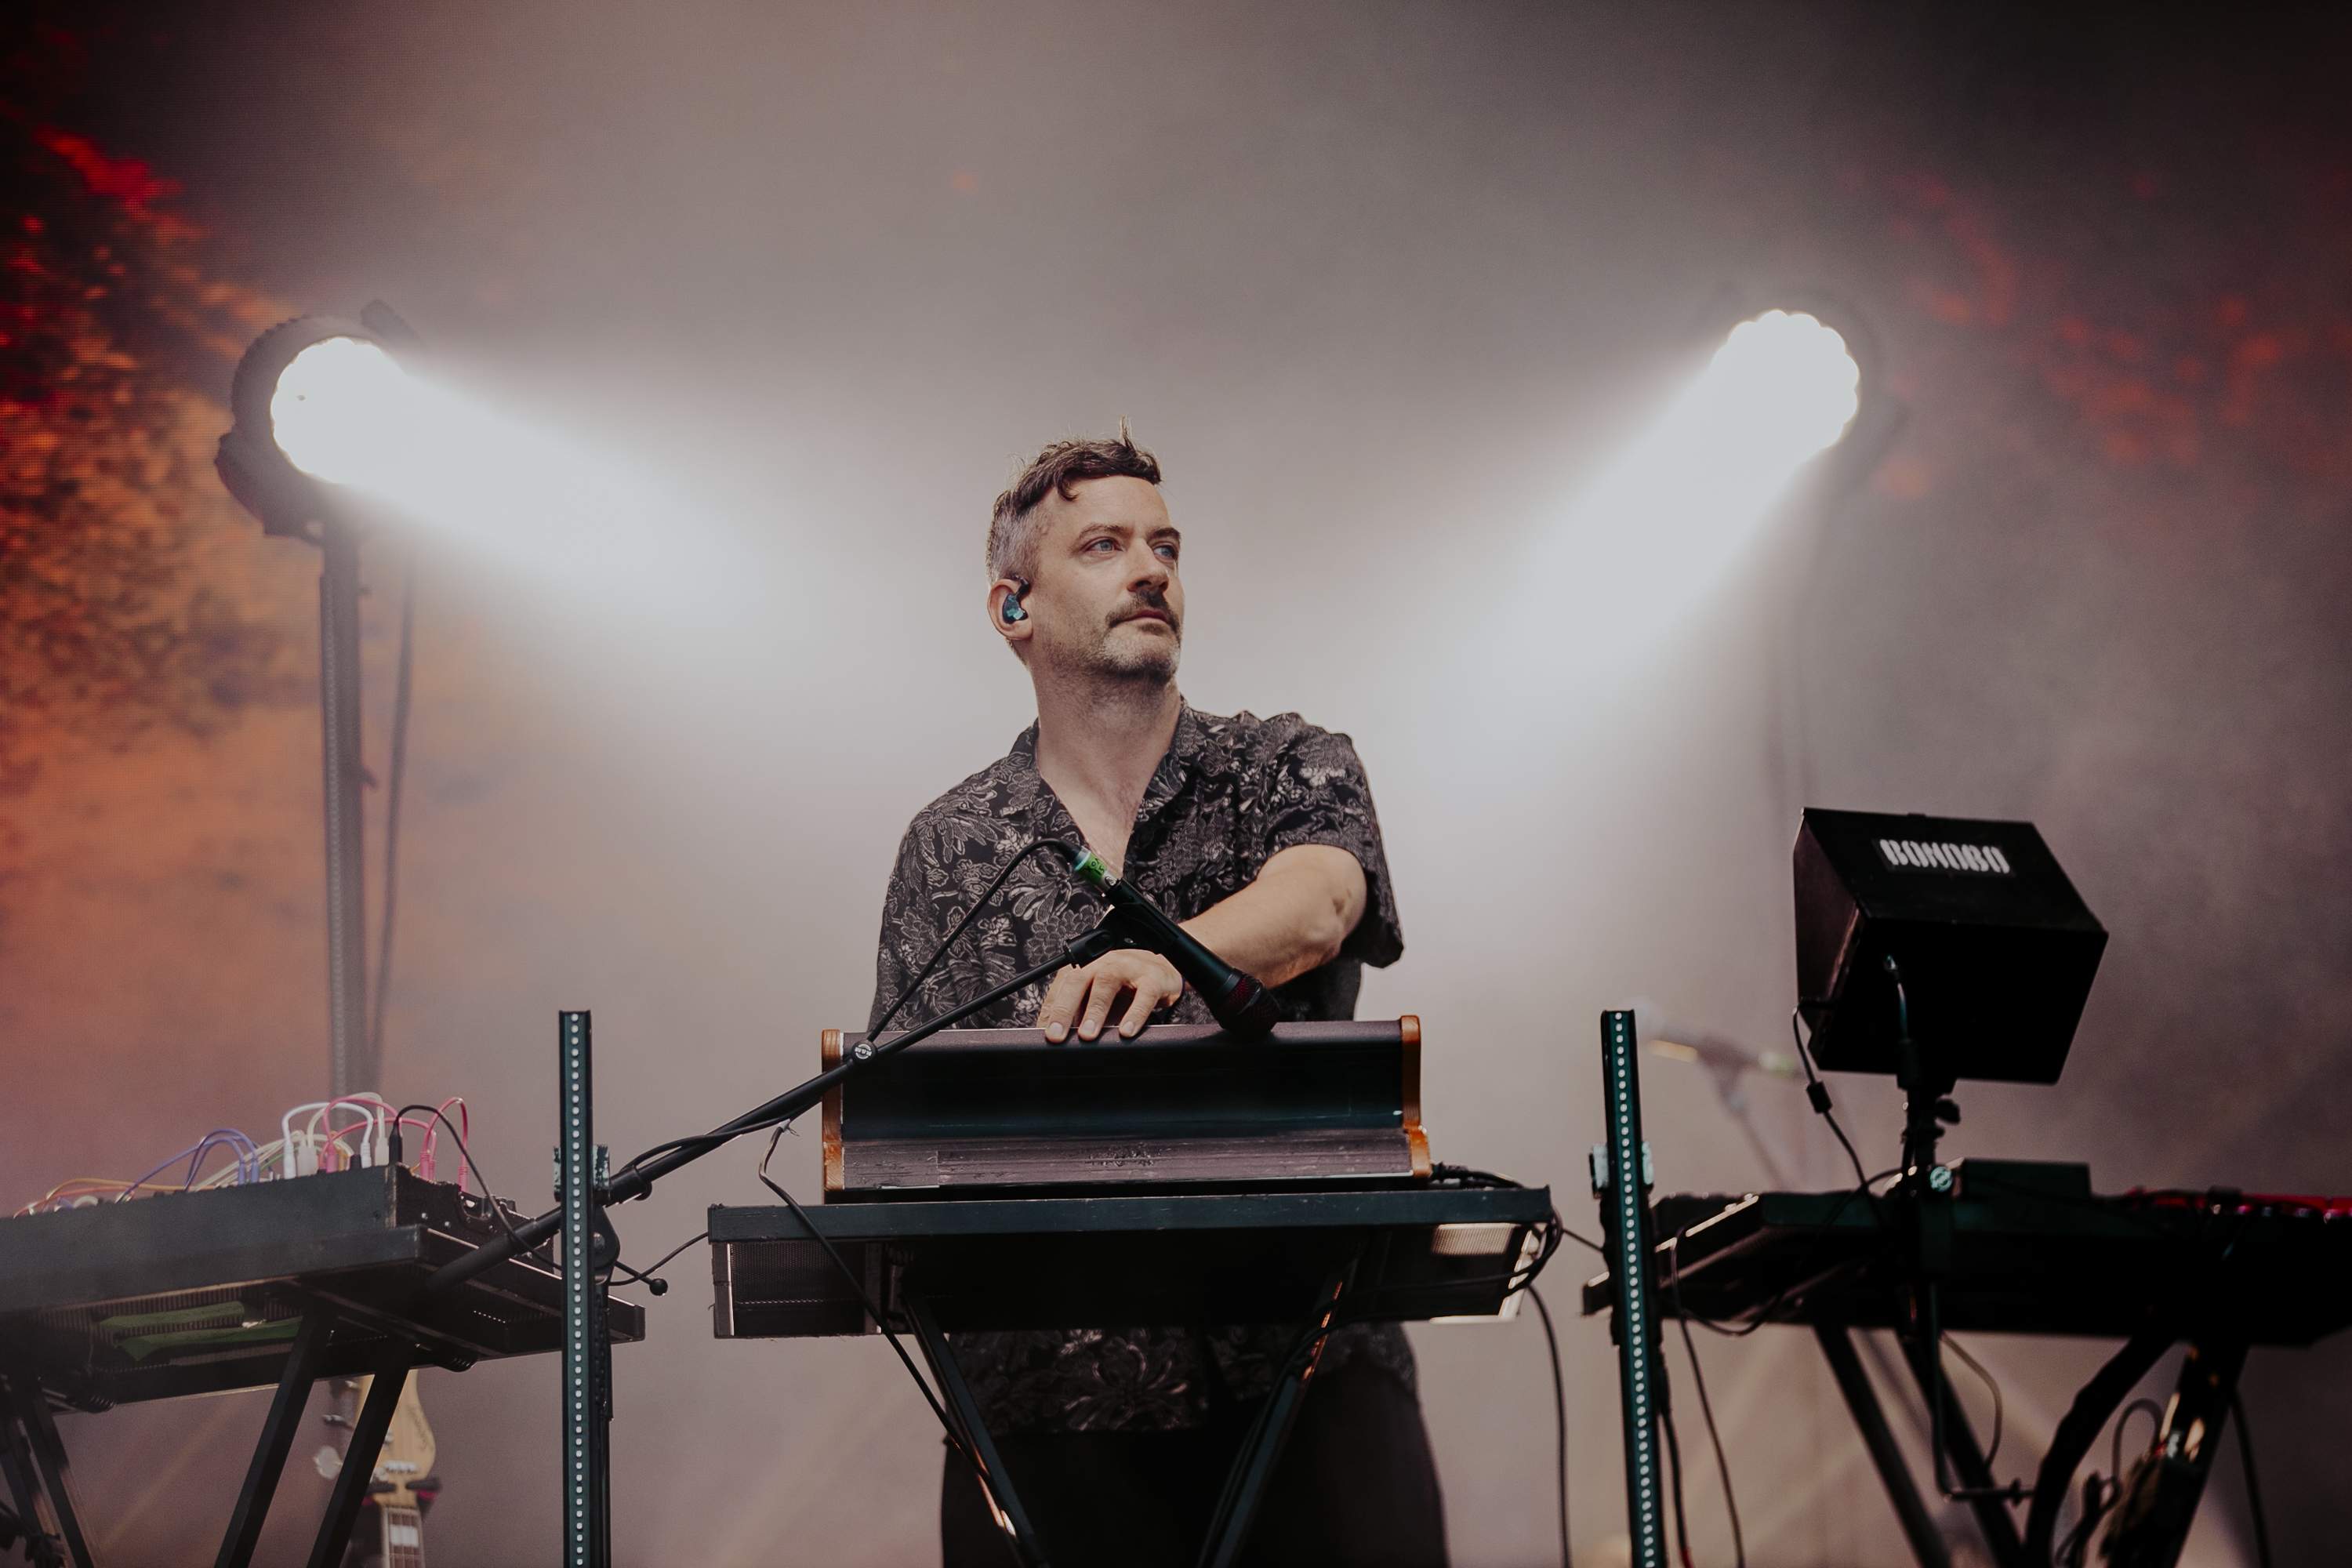 A person stands behind electronic music equipment on stage, with lights shining behind them. The person is looking to the side and wearing a patterned shirt